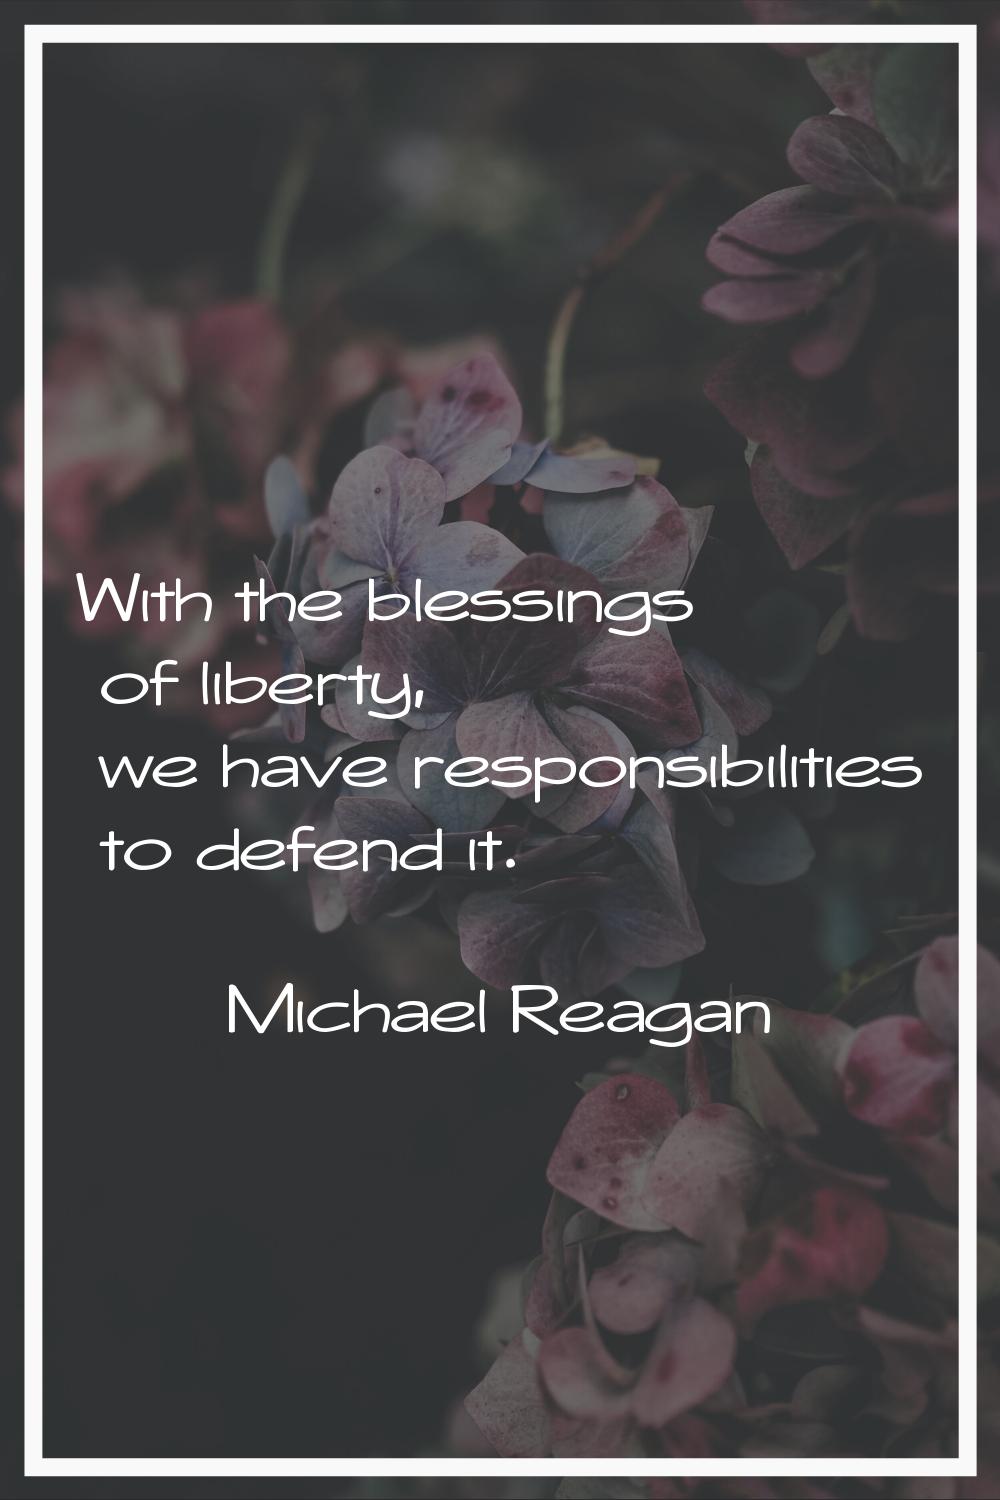 With the blessings of liberty, we have responsibilities to defend it.